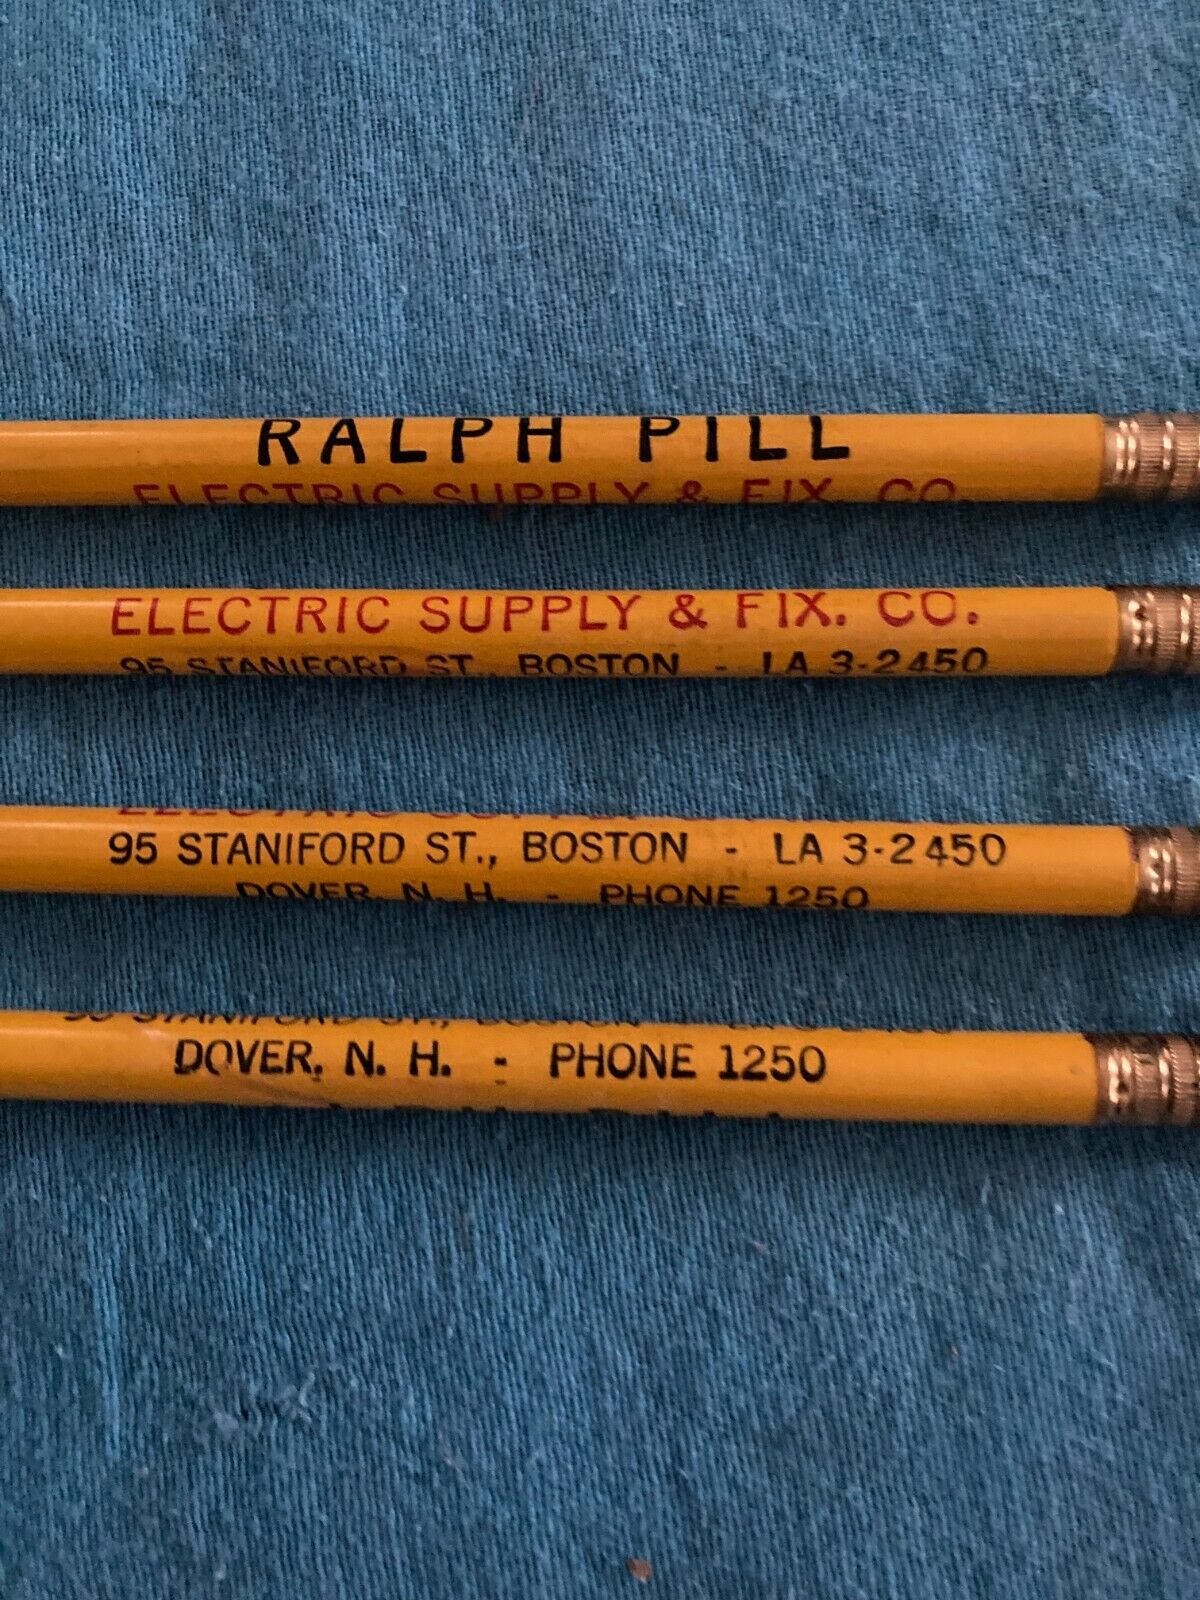 14 Vintage Advertising Pencils Lot. New Old Stock 1940-50s Barre VT and Dover NH Без бренда - фотография #3